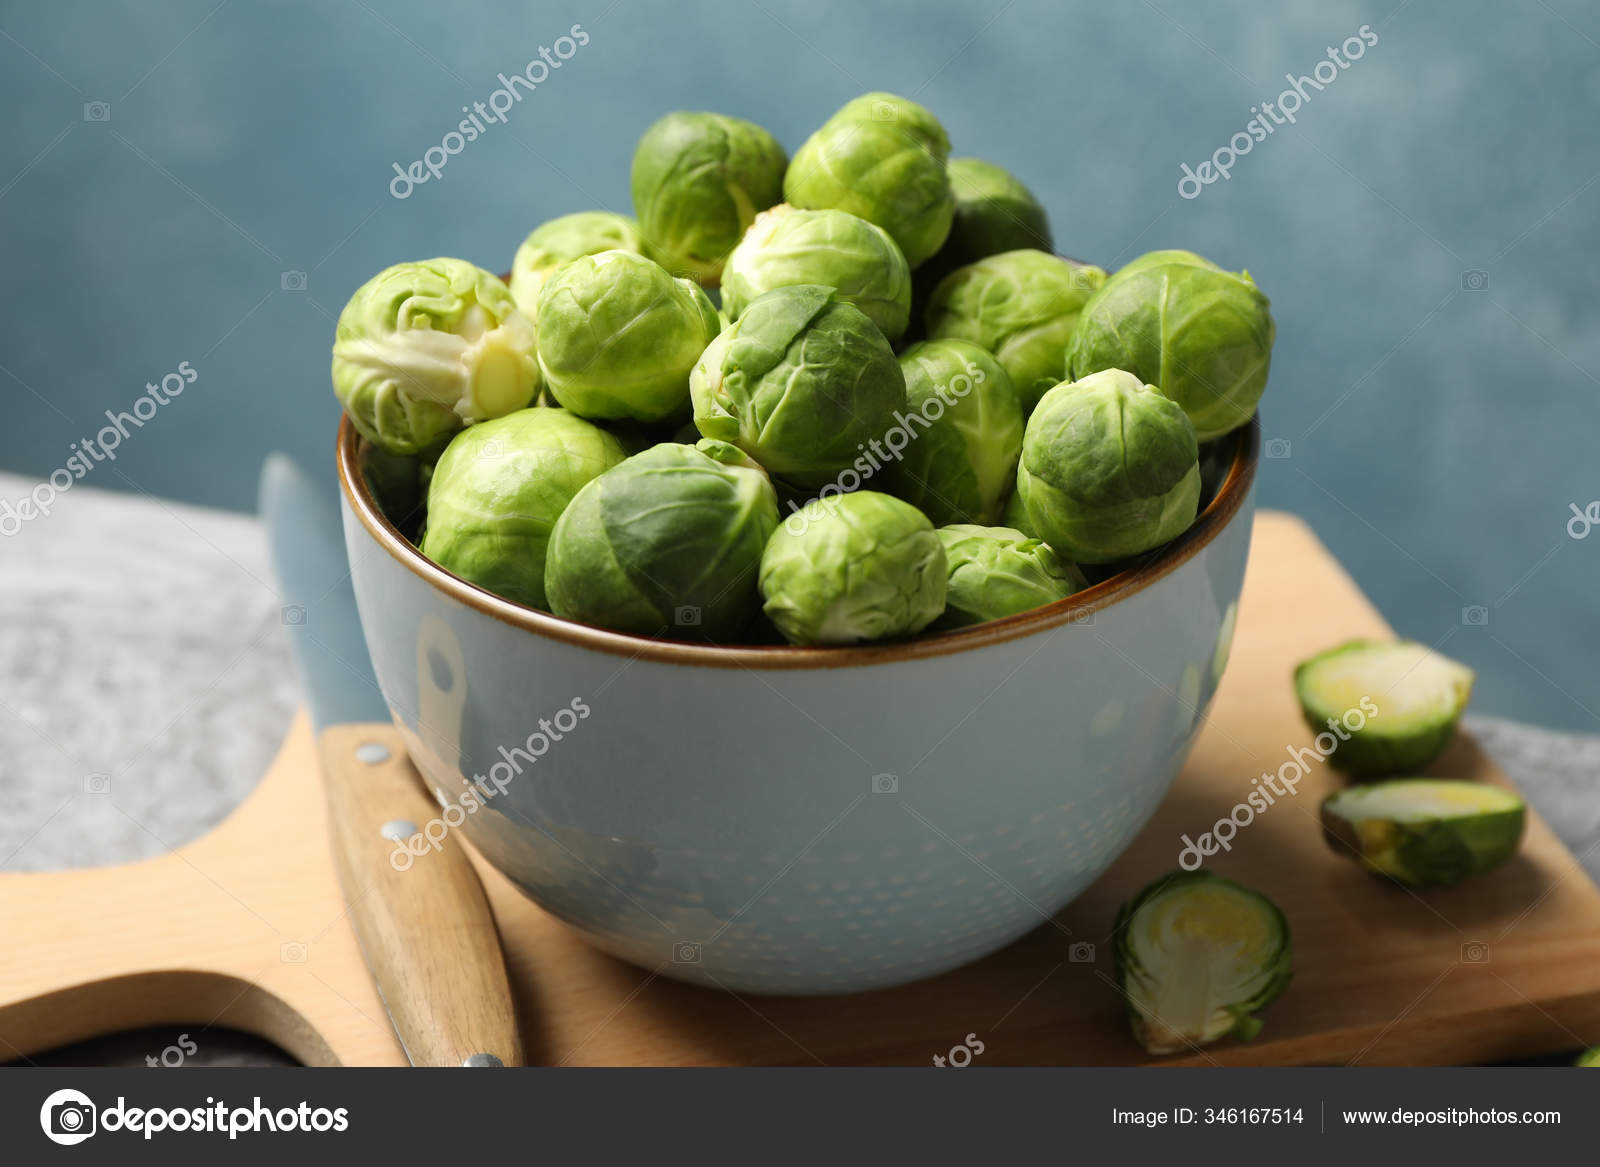 https://st3.depositphotos.com/22341038/34616/i/1600/depositphotos_346167514-stock-photo-composition-bowl-brussels-sprout-grey.jpg